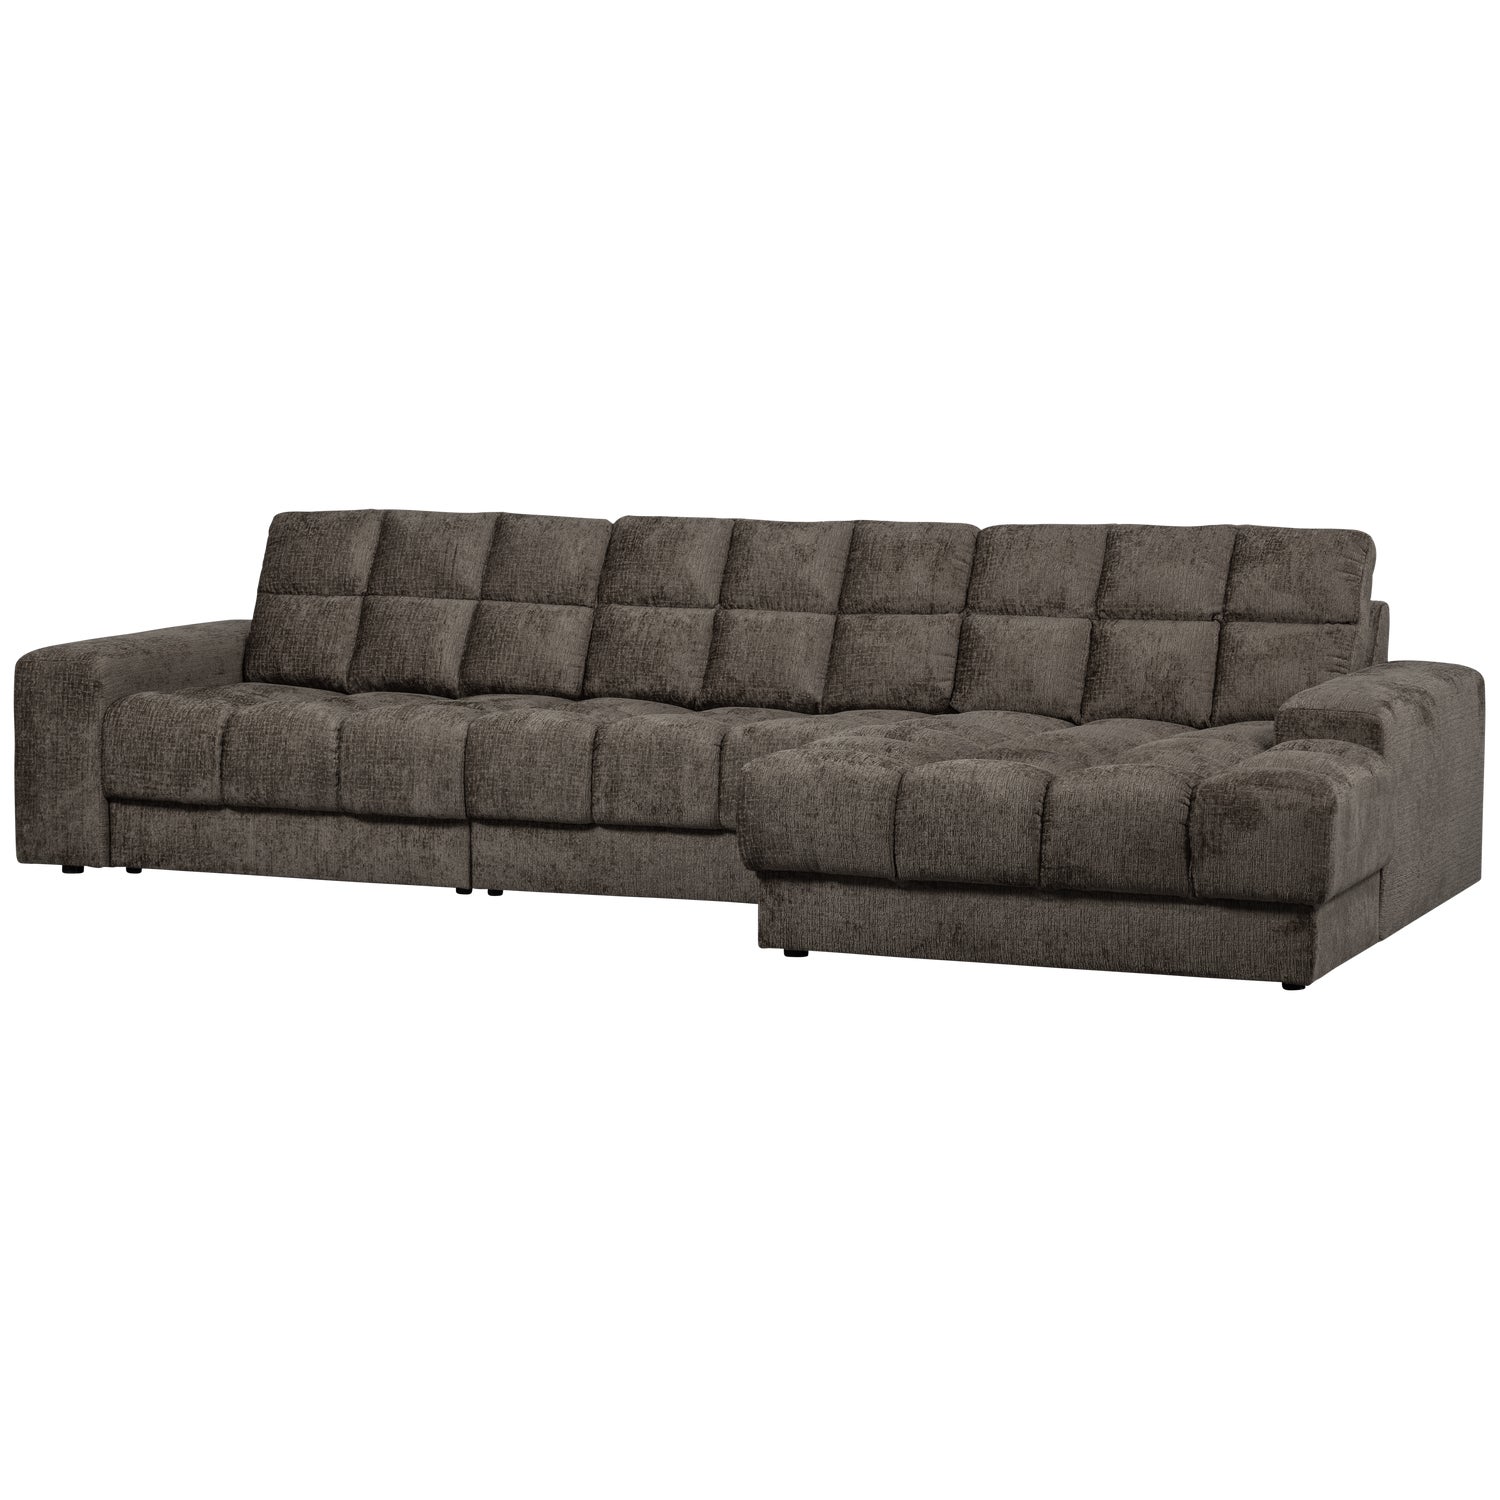 379013-MO-02_VS_WE_Second_date_chaise_longue_rechts_structure_velvet_mountain_SA.png?auto=webp&format=png&width=1500&height=1500